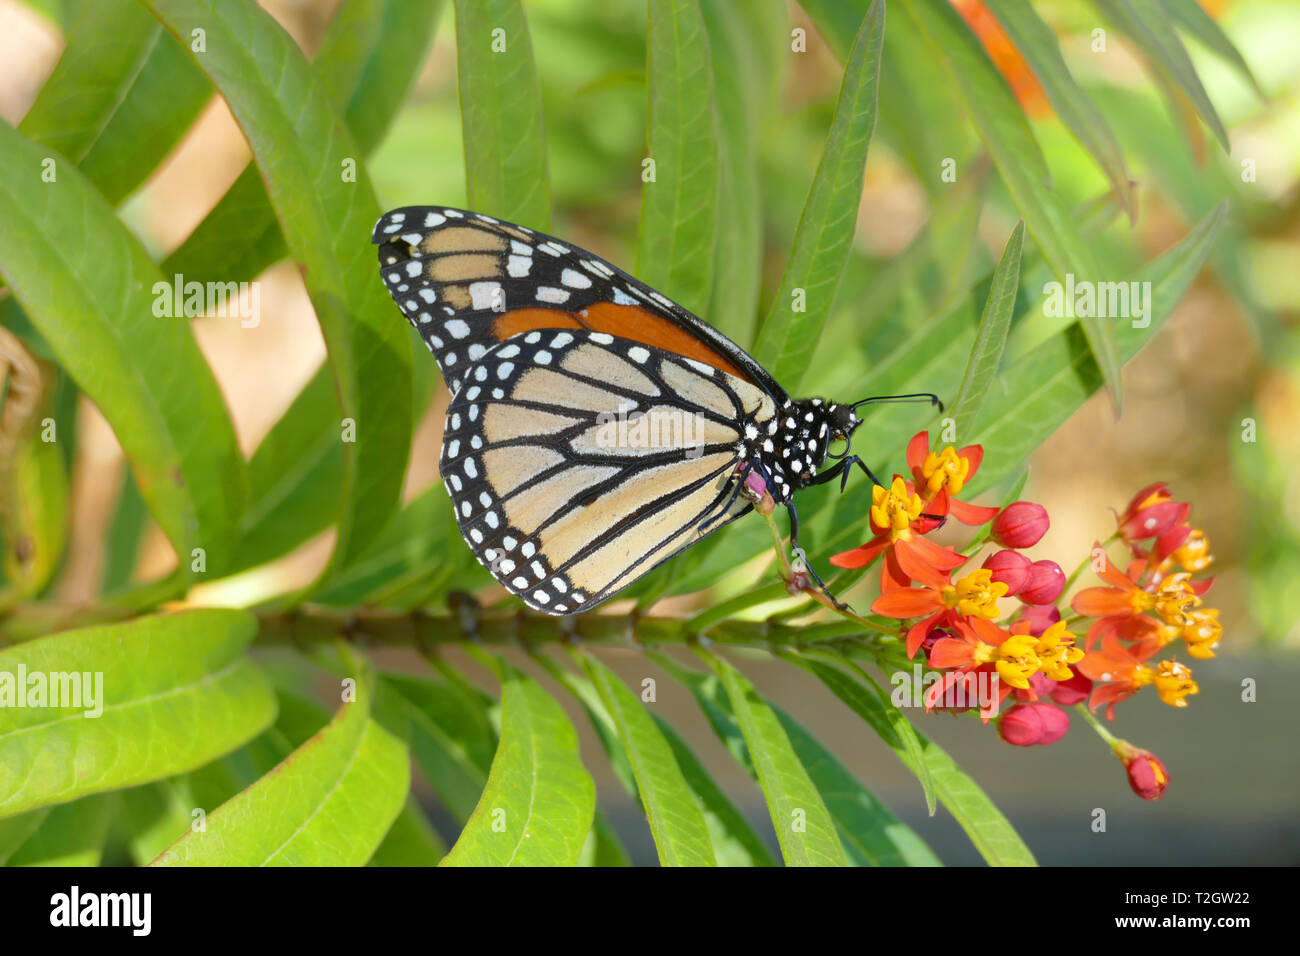 Nice colorful butterfly looking for nectar on a blossom Stock Photo